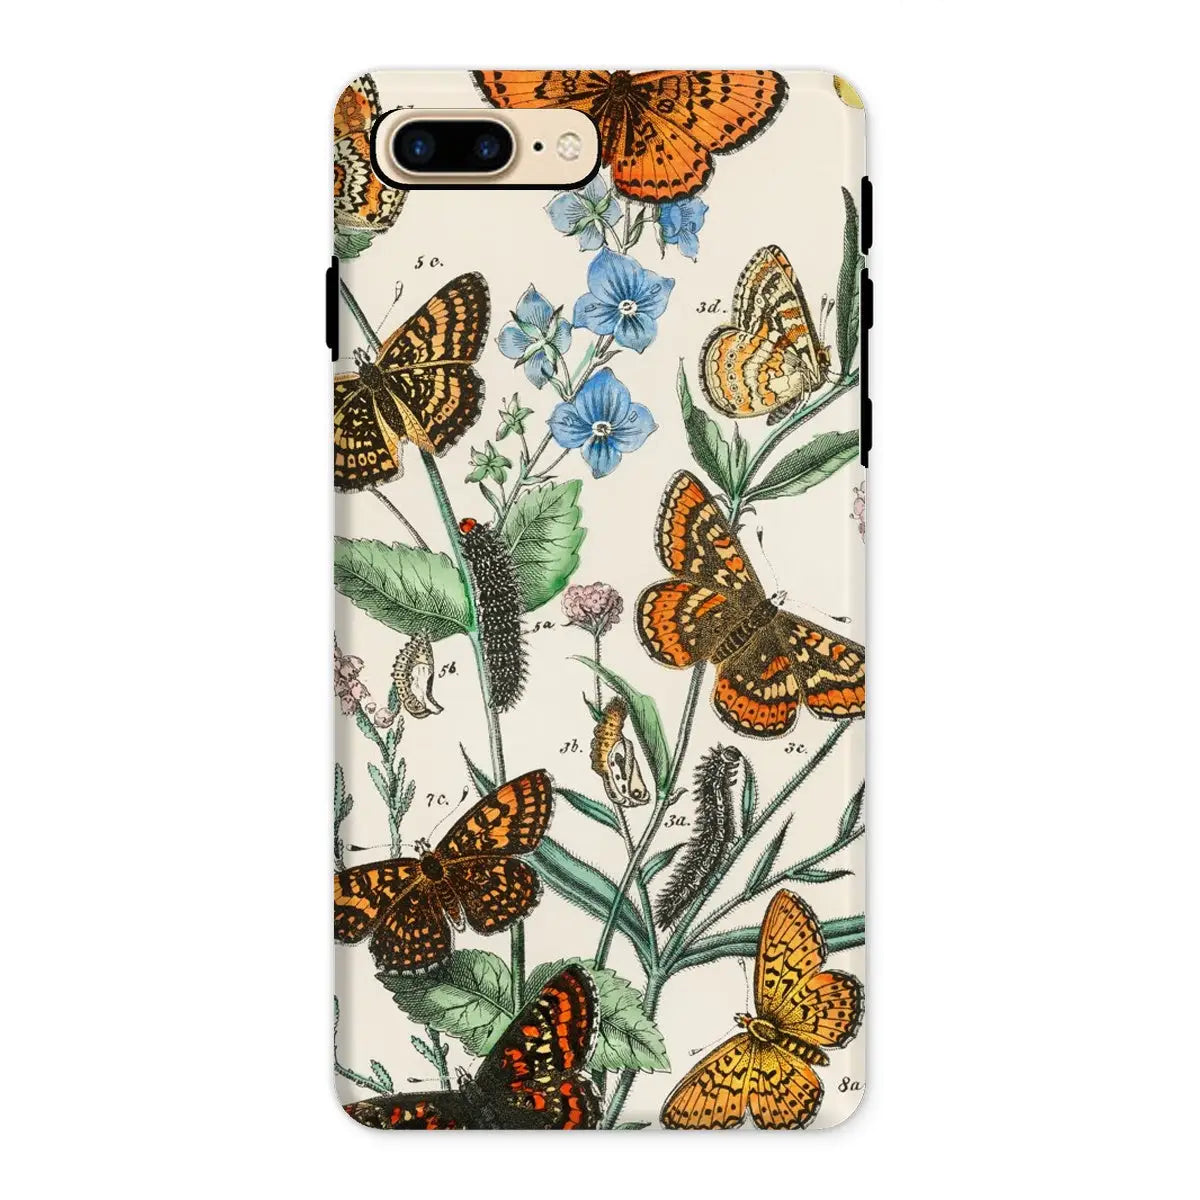 European Butterflies And Moths 2 Art Phone Case - William Forsell Kirby - Iphone 8 Plus / Matte - Mobile Phone Cases